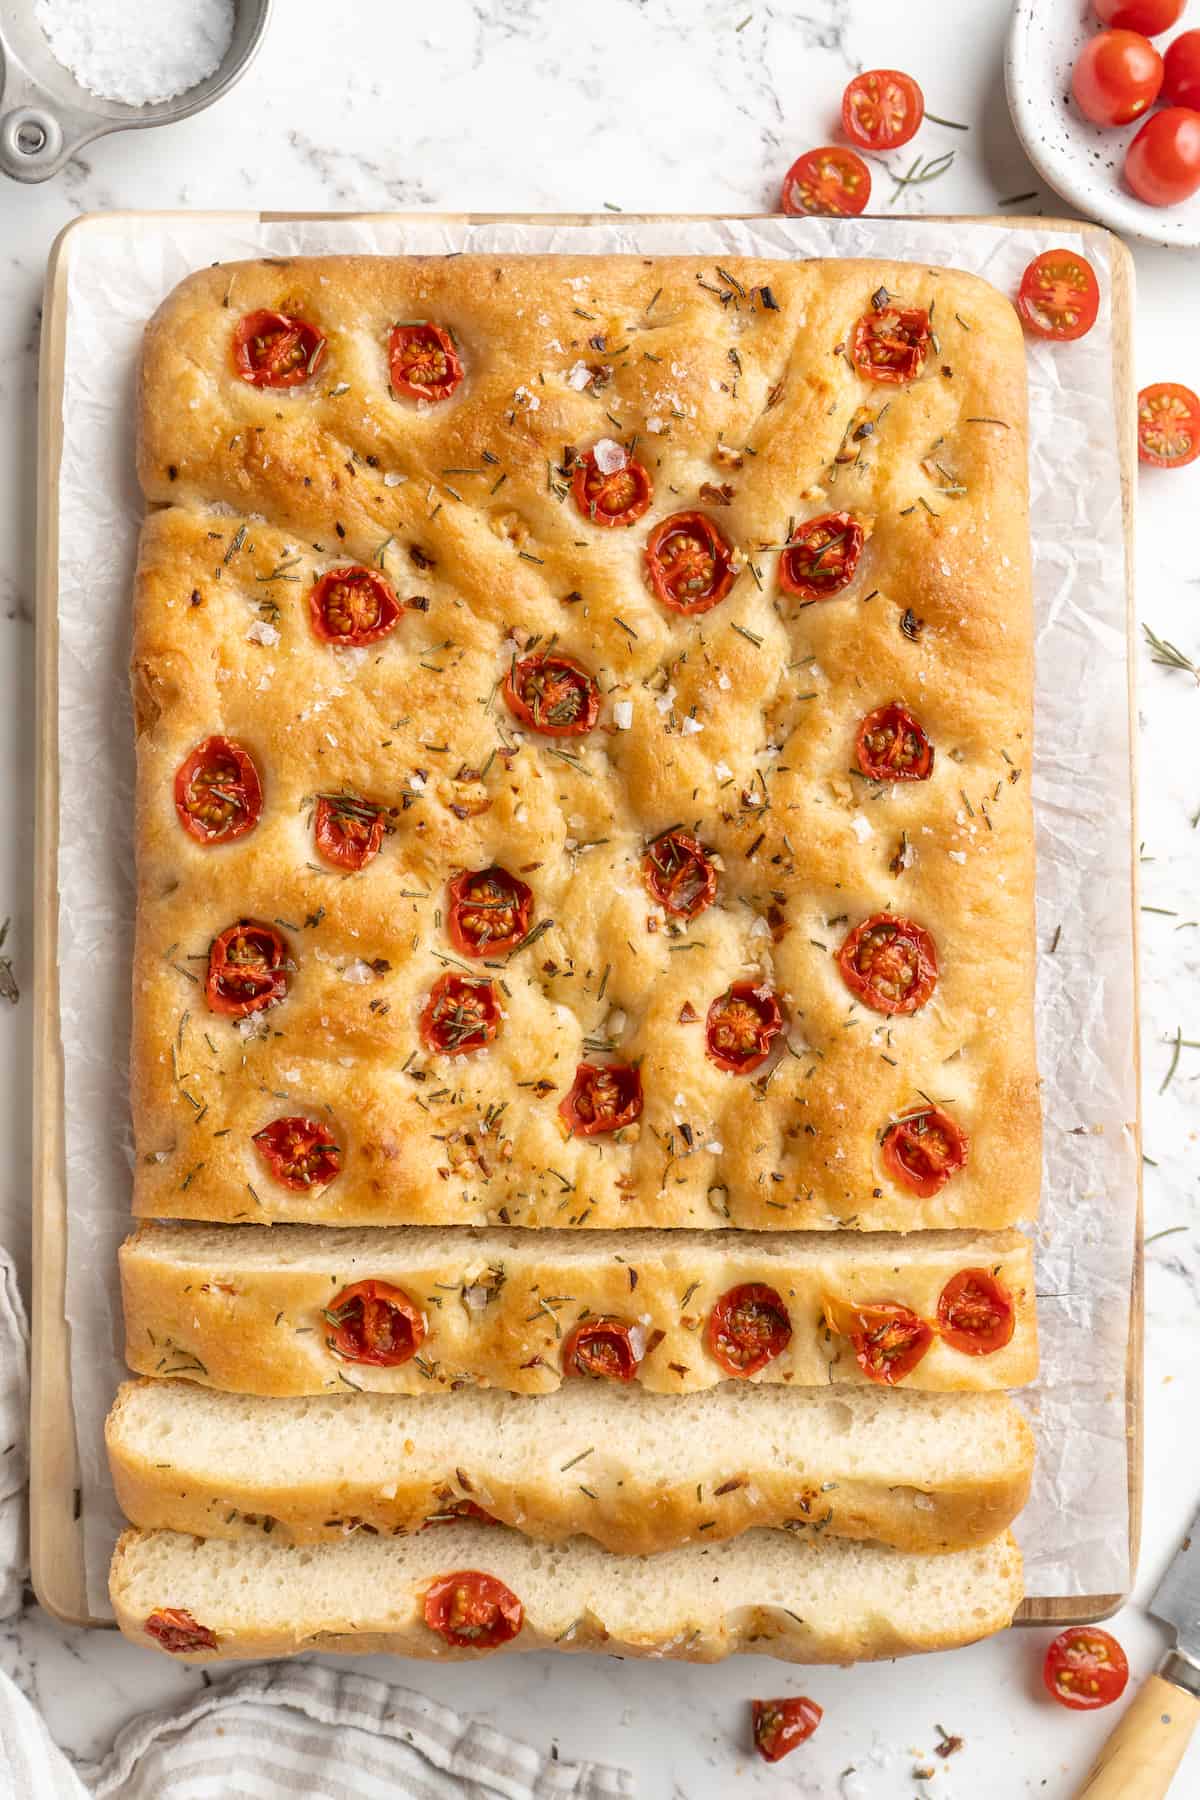 Half sliced gluten-free focaccia with tomatoes and rosemary